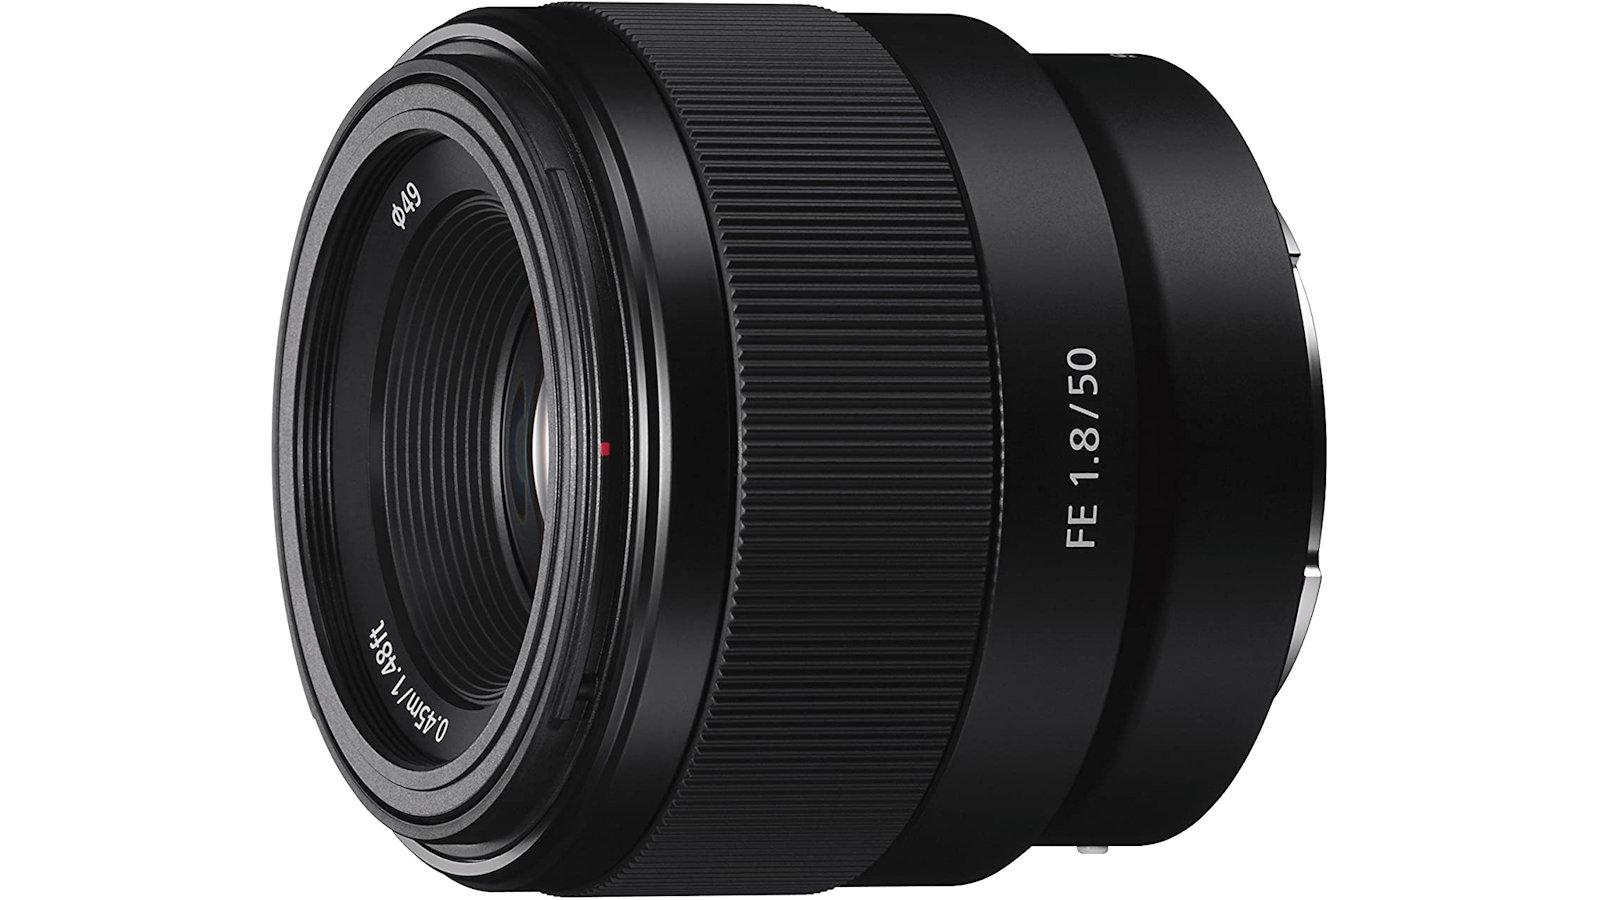 Best lenses for Sony A6400: Sony FE 50mm f/1.8